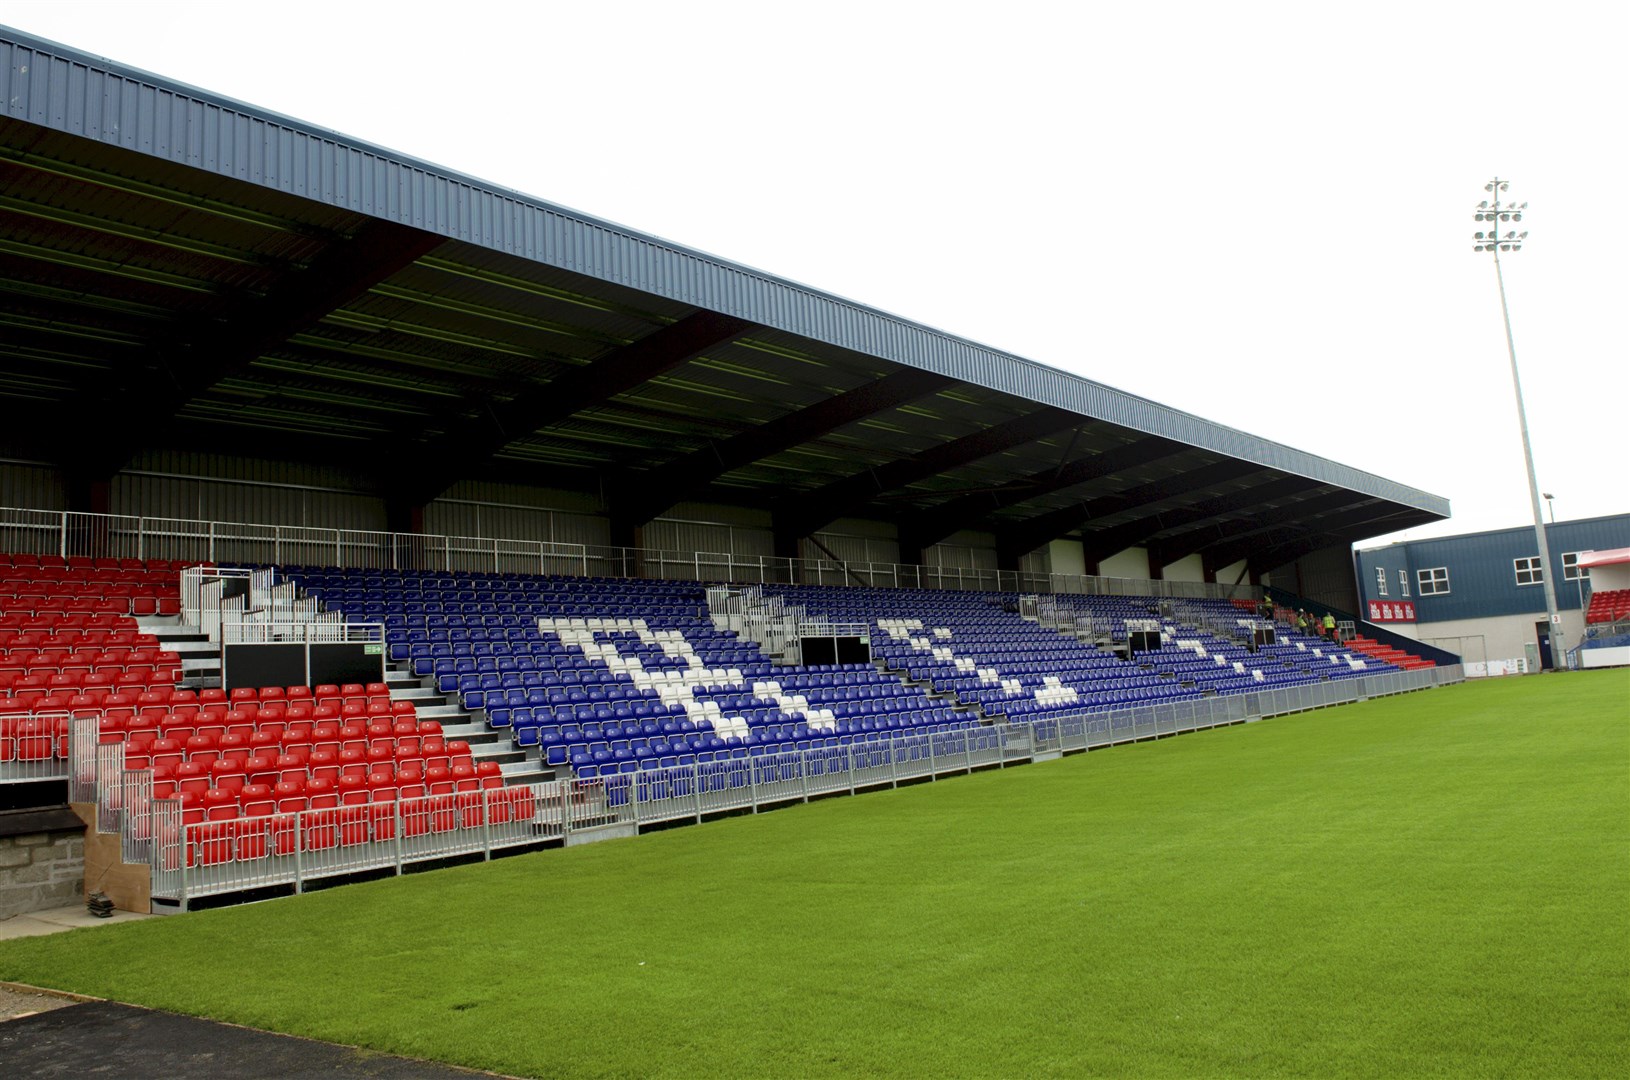 Ross County FC has issued health-related advice in light of coronavirus concerns ahead of match.